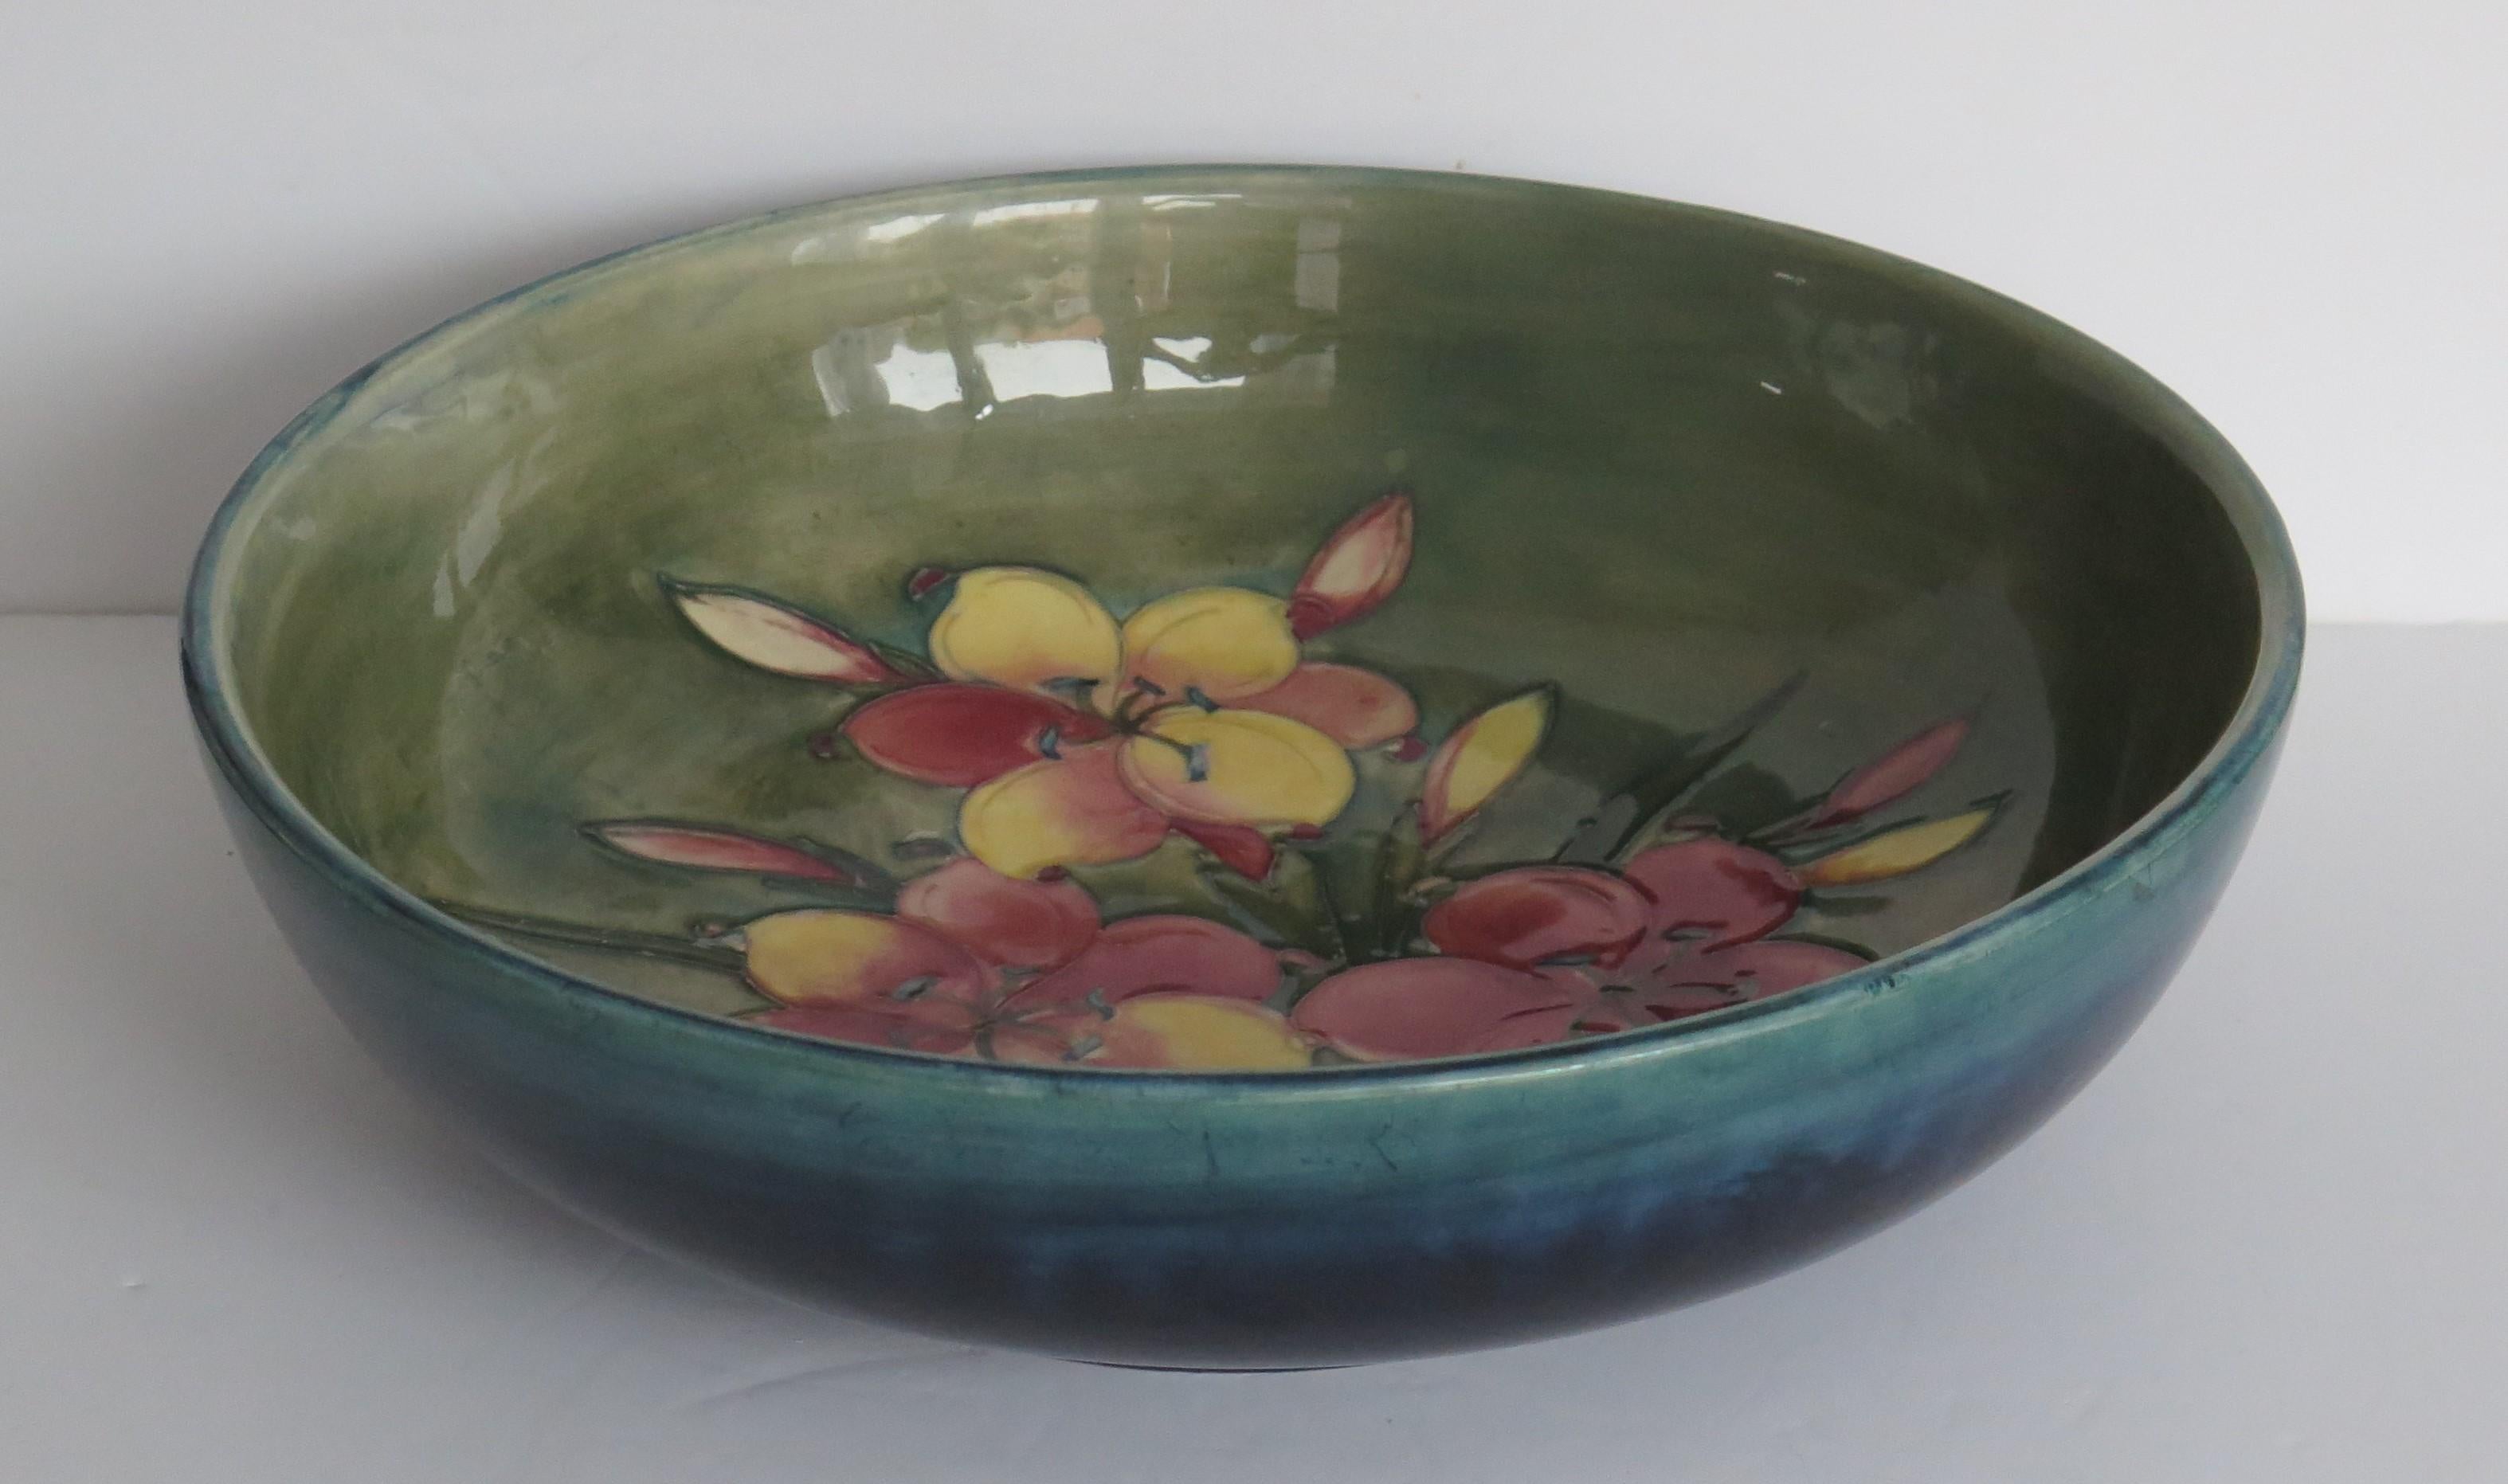 This is a very good early example of a large diameter bowl made by William Moorcroft, of Moorcroft Pottery in the Freesia pattern and dating to circa 1935.

A very beautiful large early Moorcroft Bowl in the usual distinctive bold colours.

The